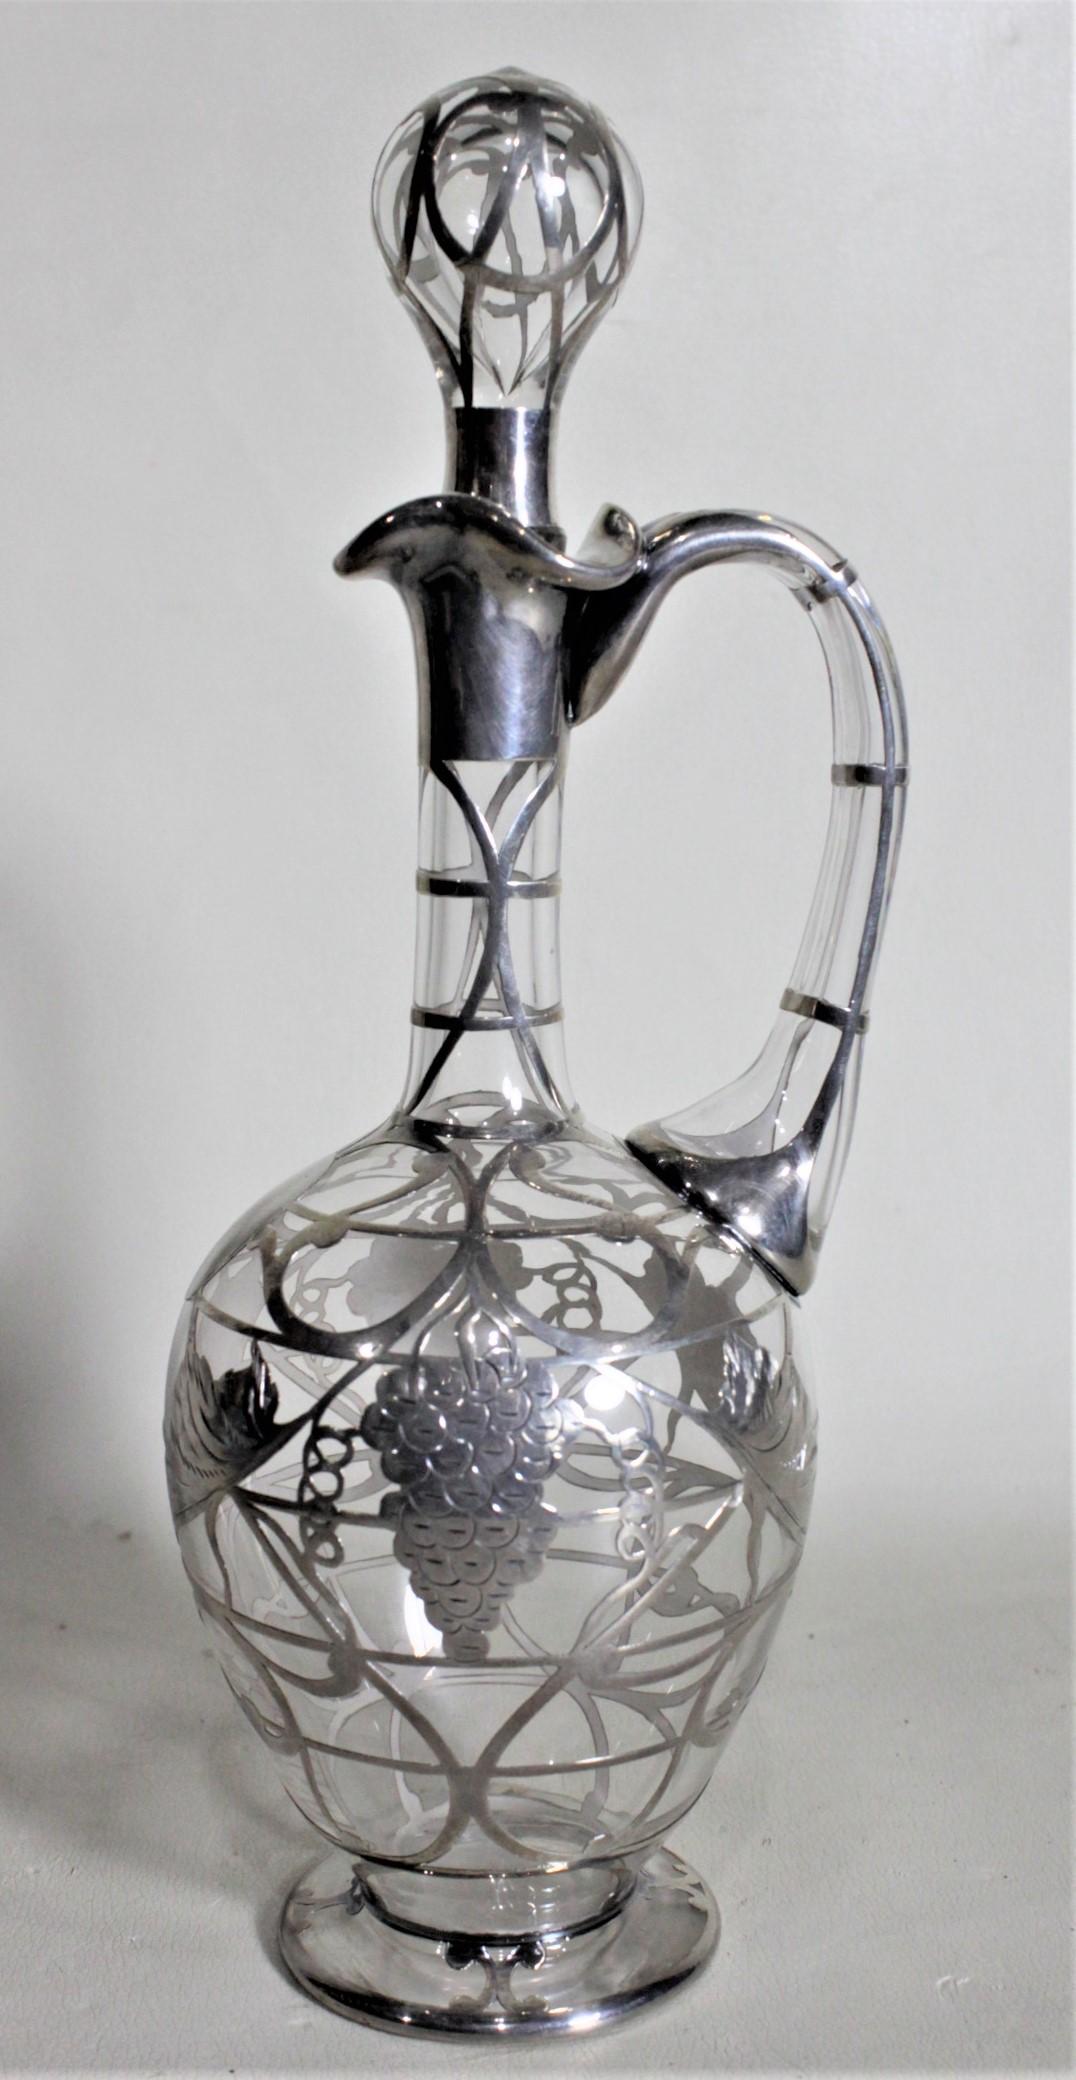 This hand formed and silver overlay decorated Sherry or Port decanter is unsigned, but presumed to have been made in Europe, likely Italy, in approximately 1920 in the period Art Deco style. The decanter is done with clear glass with a thick silver